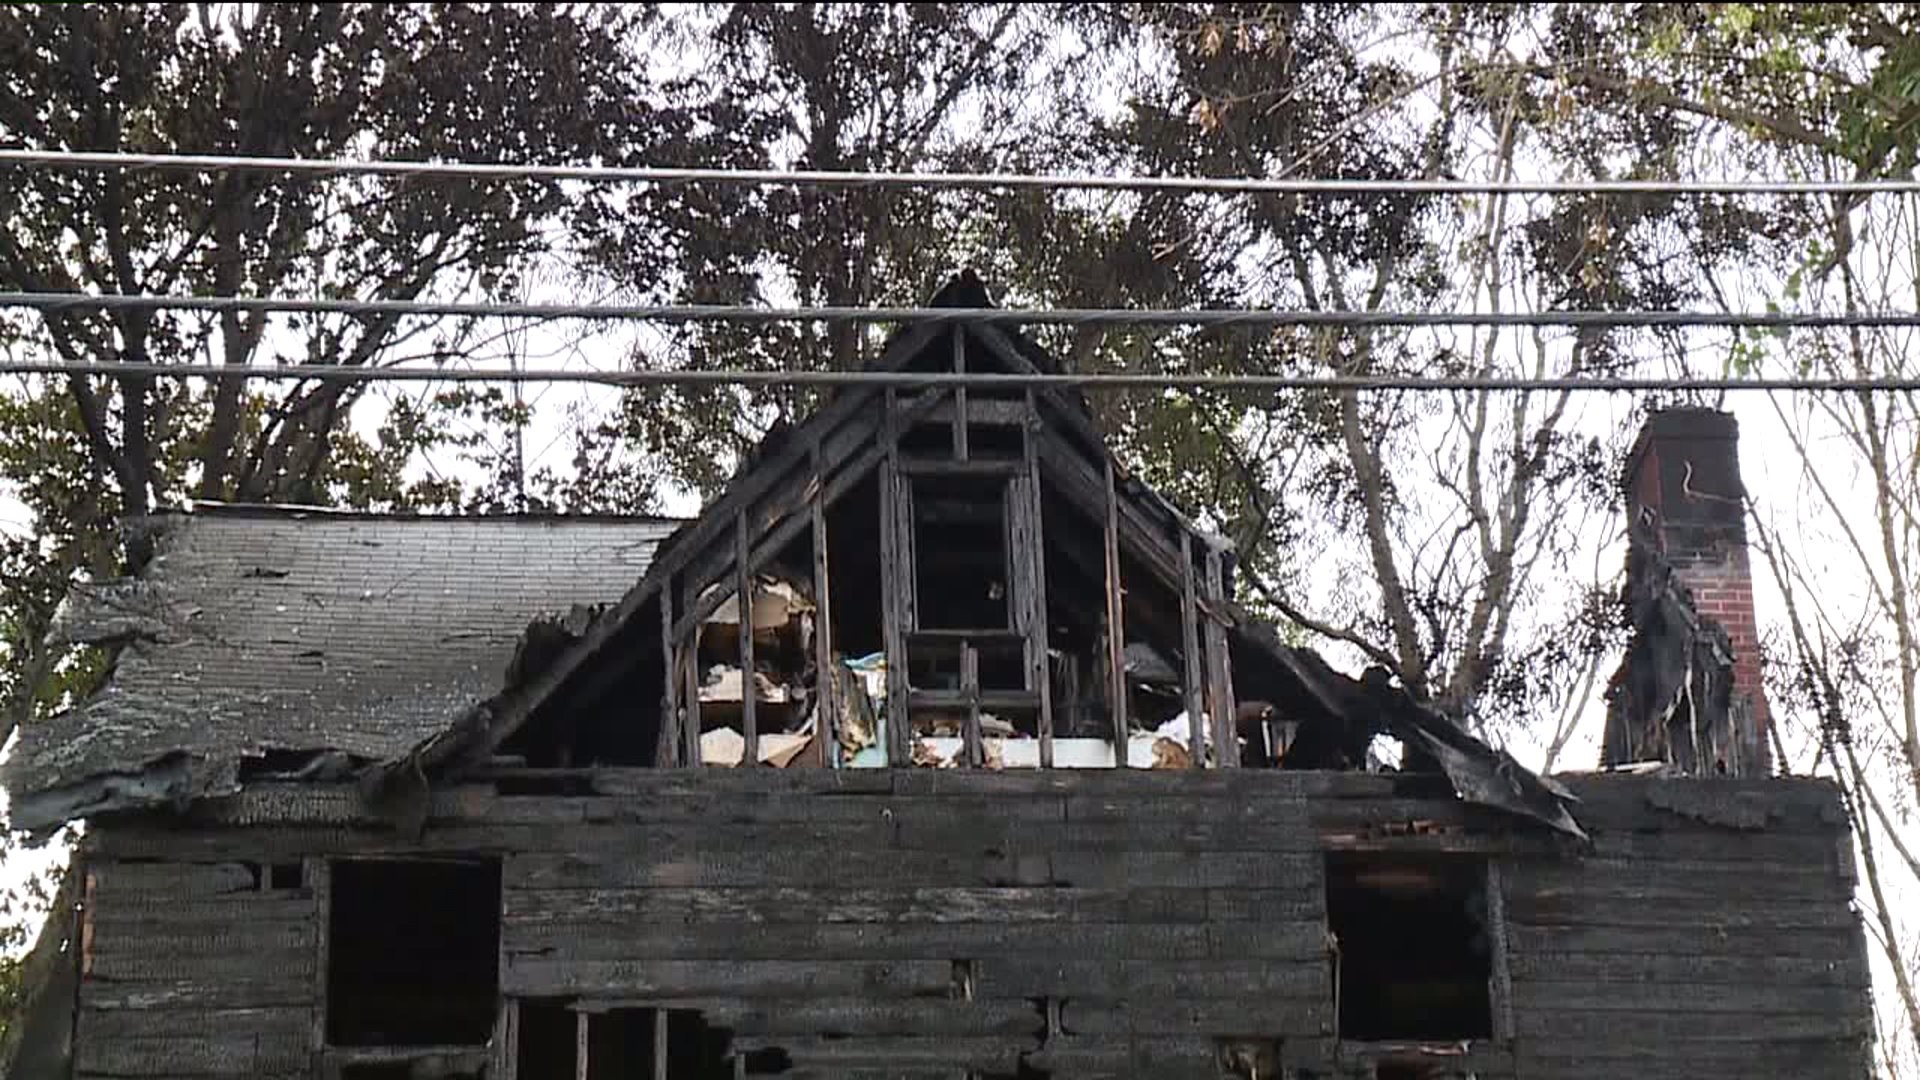 State Police Fire Marshal: Too Much Damage to Determine Cause of Fire That Gutted Home Near Lake Winola